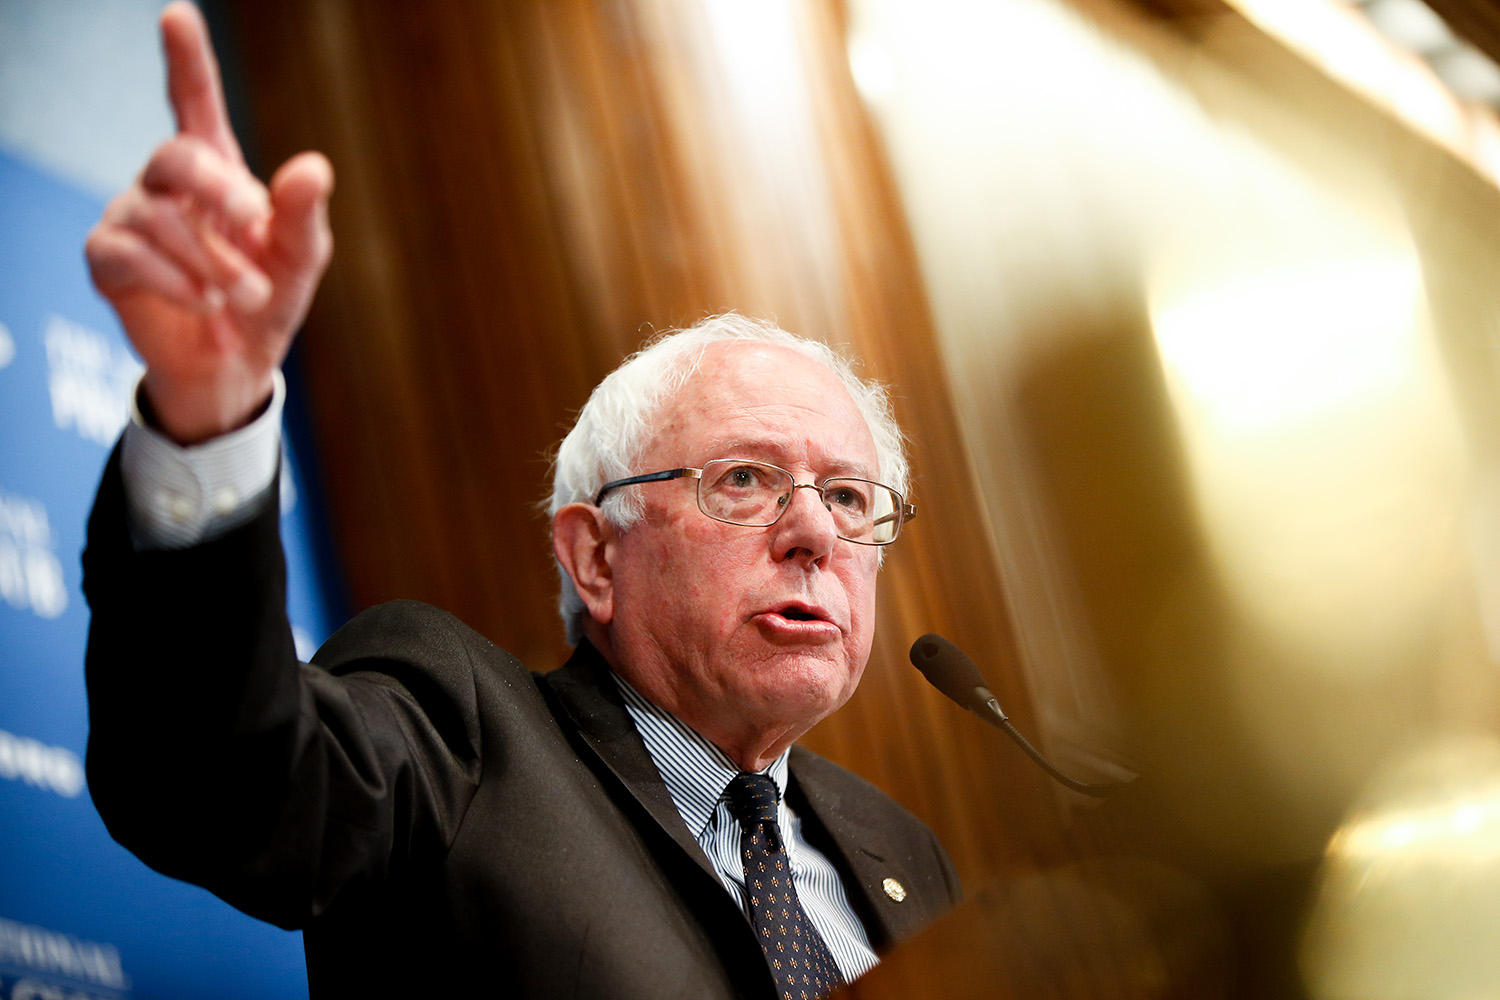 Sen. Bernie Sanders, I-Vt., speaks at a luncheon at the National Press Club on Monday, March 9, 2015 in Washington. Sanders, an independent who caucuses with Democrats, is considering running for the 2016 Democratic nomination as a liberal alternative to Hillary Clinton, focusing on income inequality and climate change. (AP Photo/Andrew Harnik)